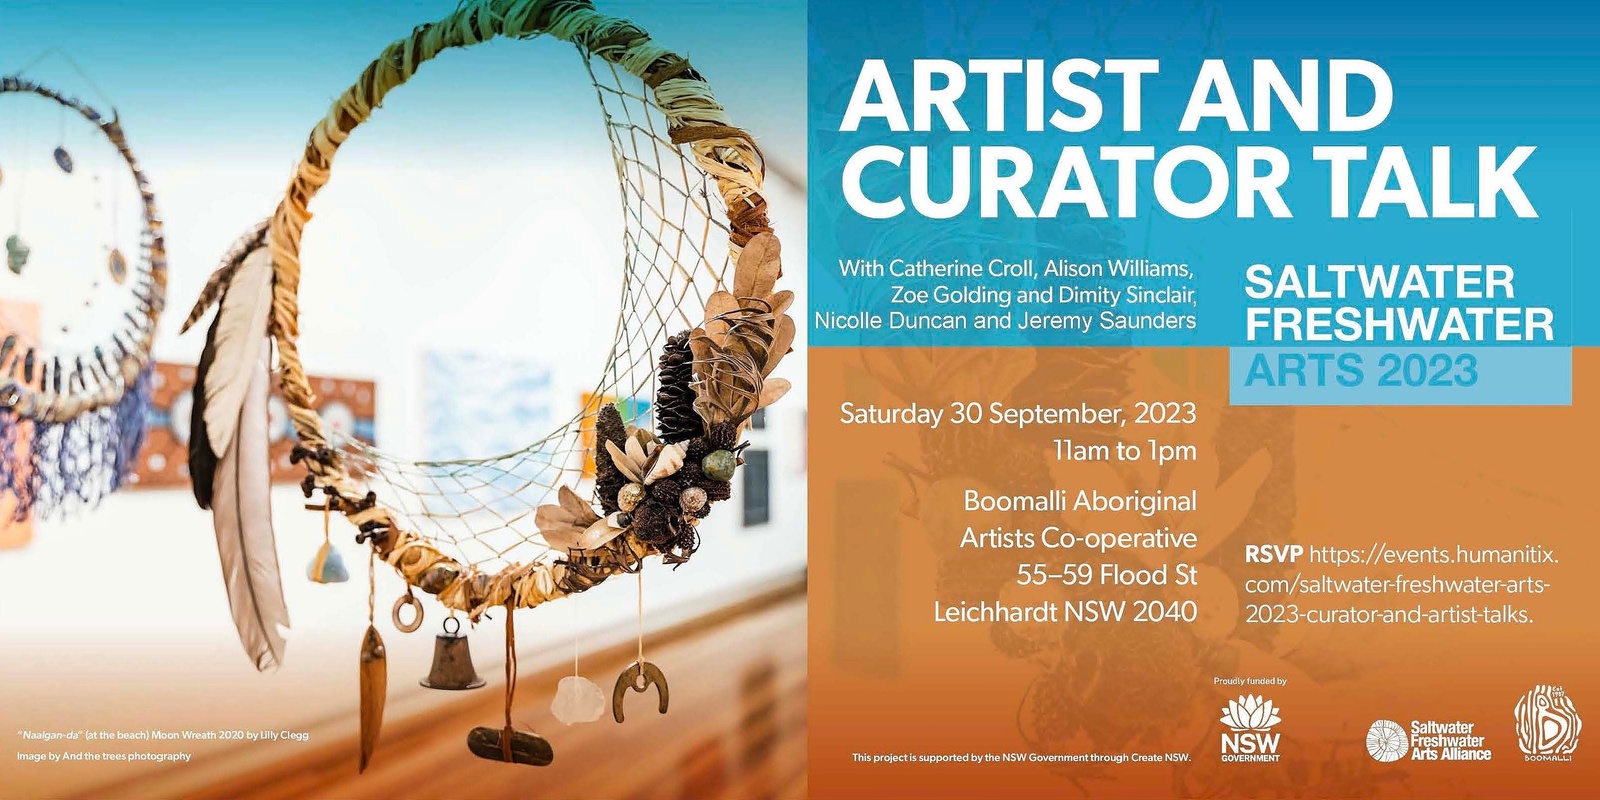 Banner image for Saltwater Freshwater Arts 2023 Curator and Artist Talk